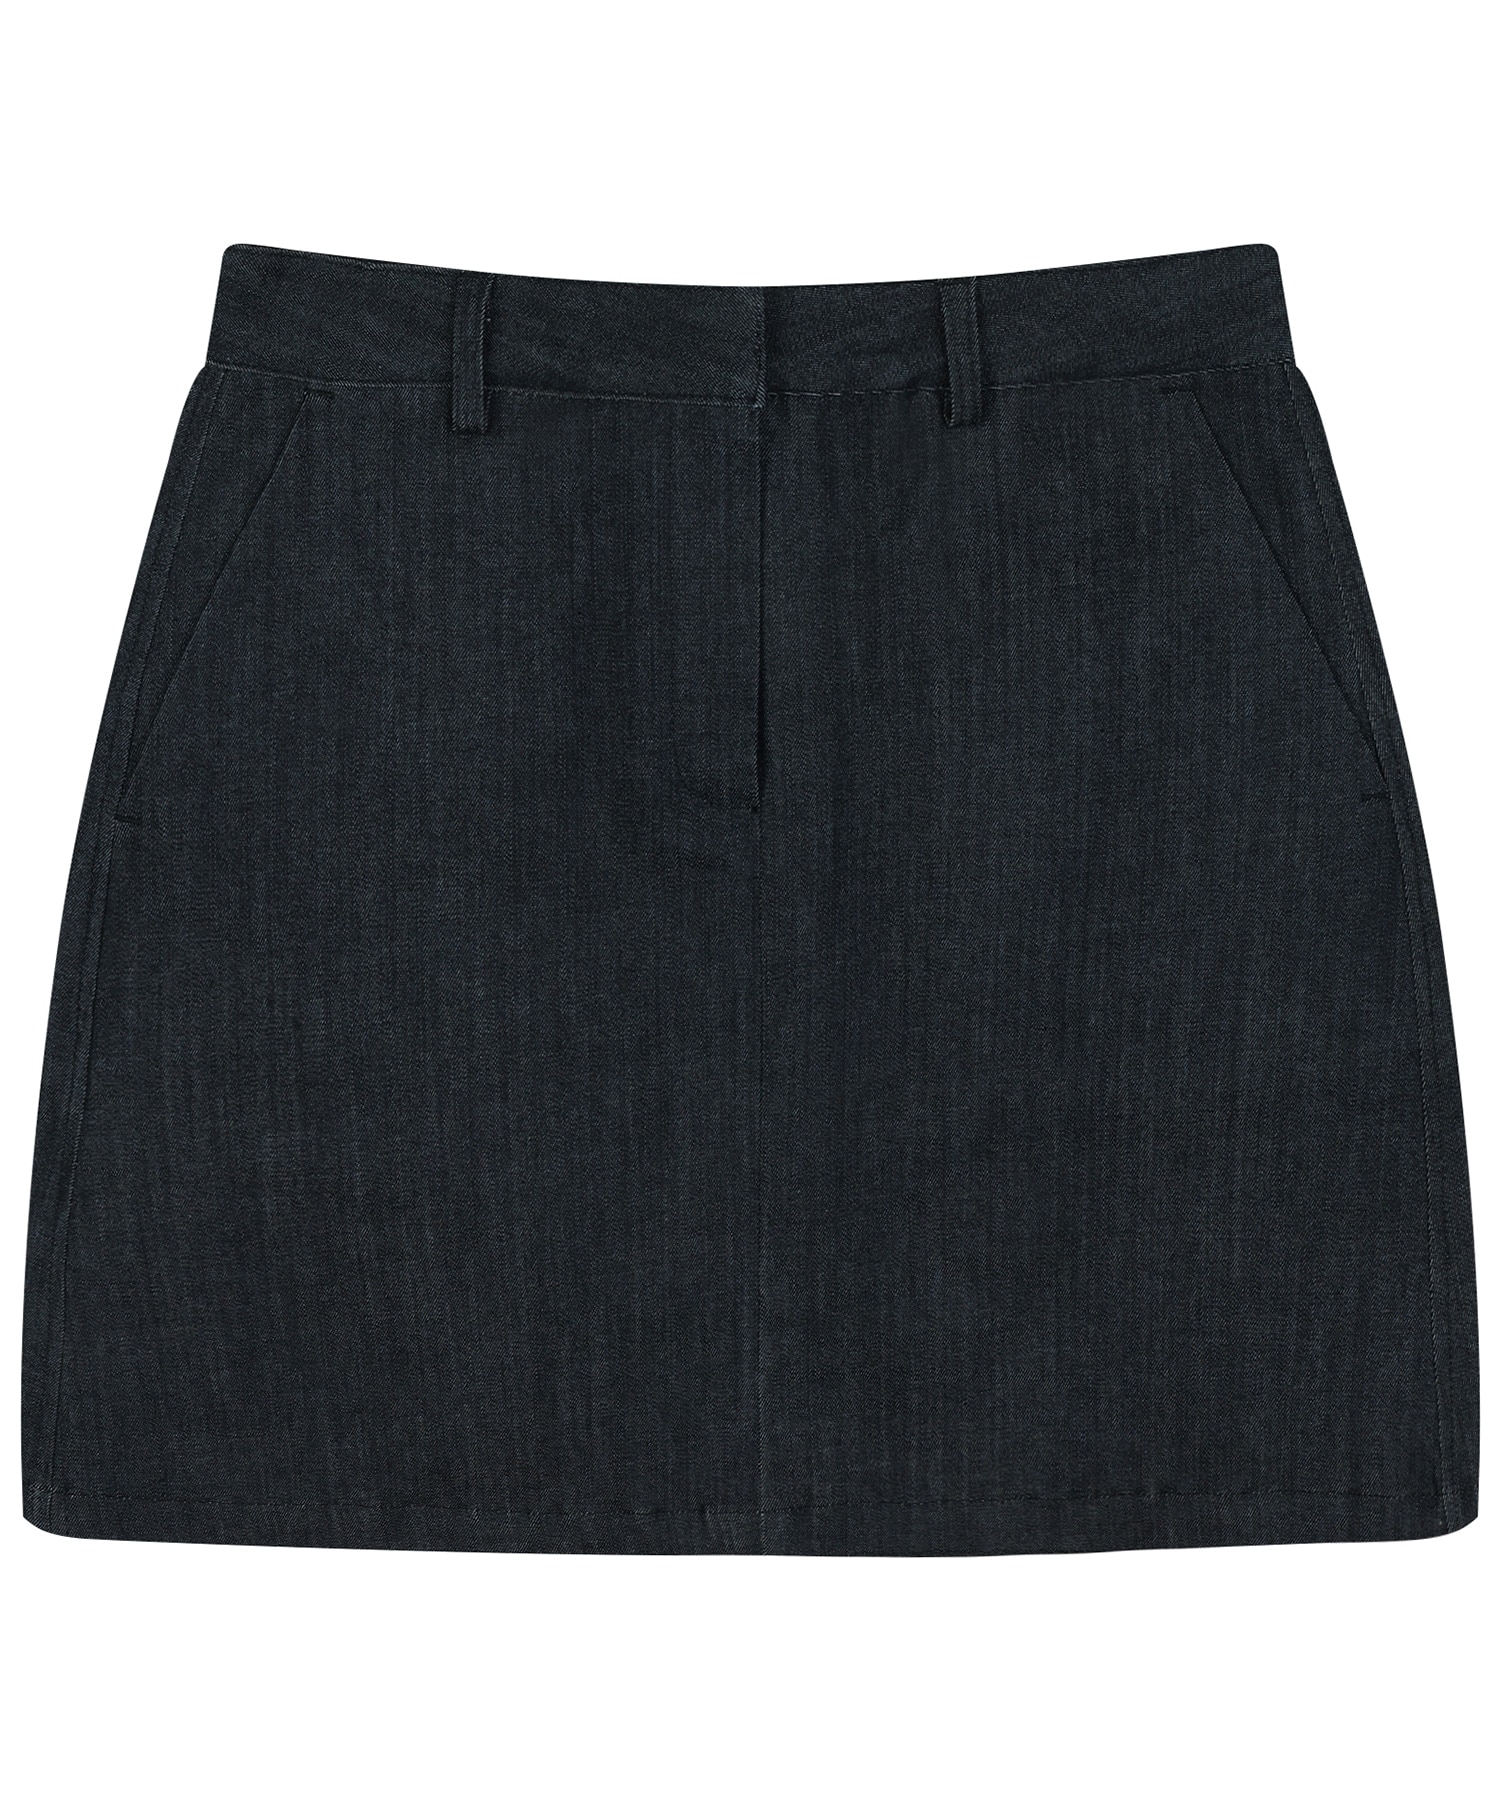 FW 22 HAPPINESS A-LINE MINI SKIRT_NAVY